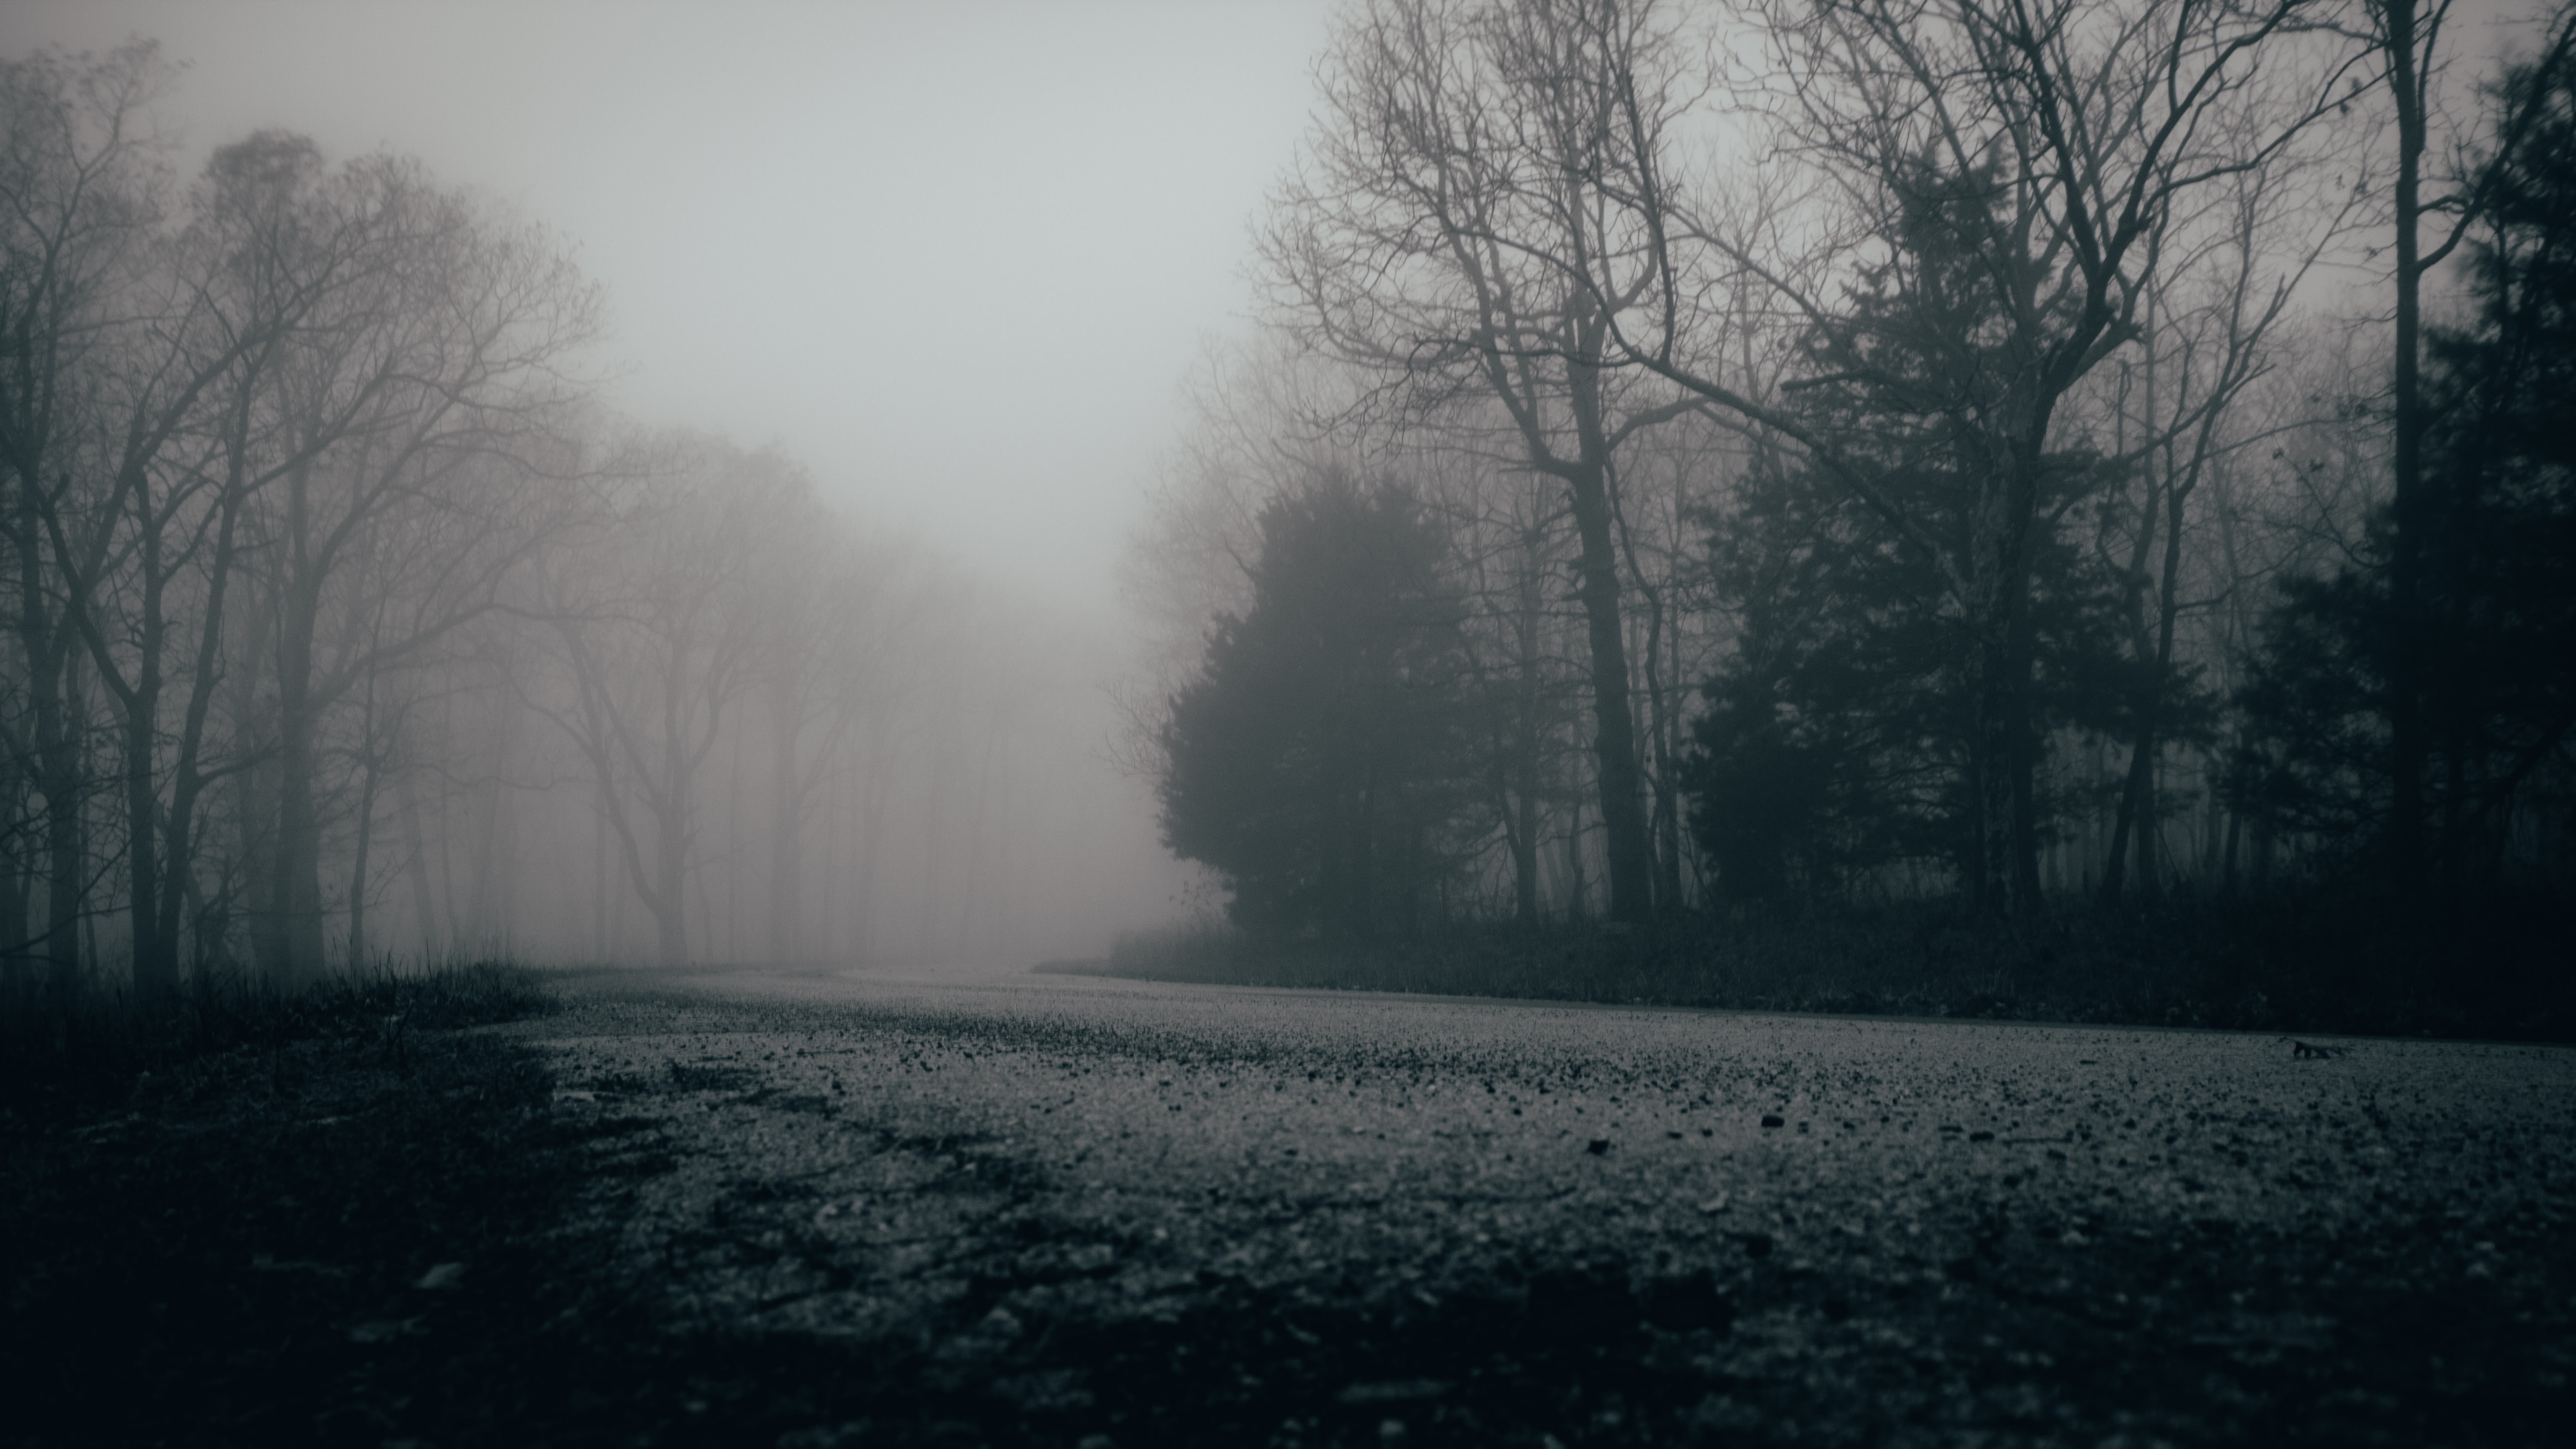 Wallpaper, mist, gloomy, grey, trees, nature, forest 4660x2621